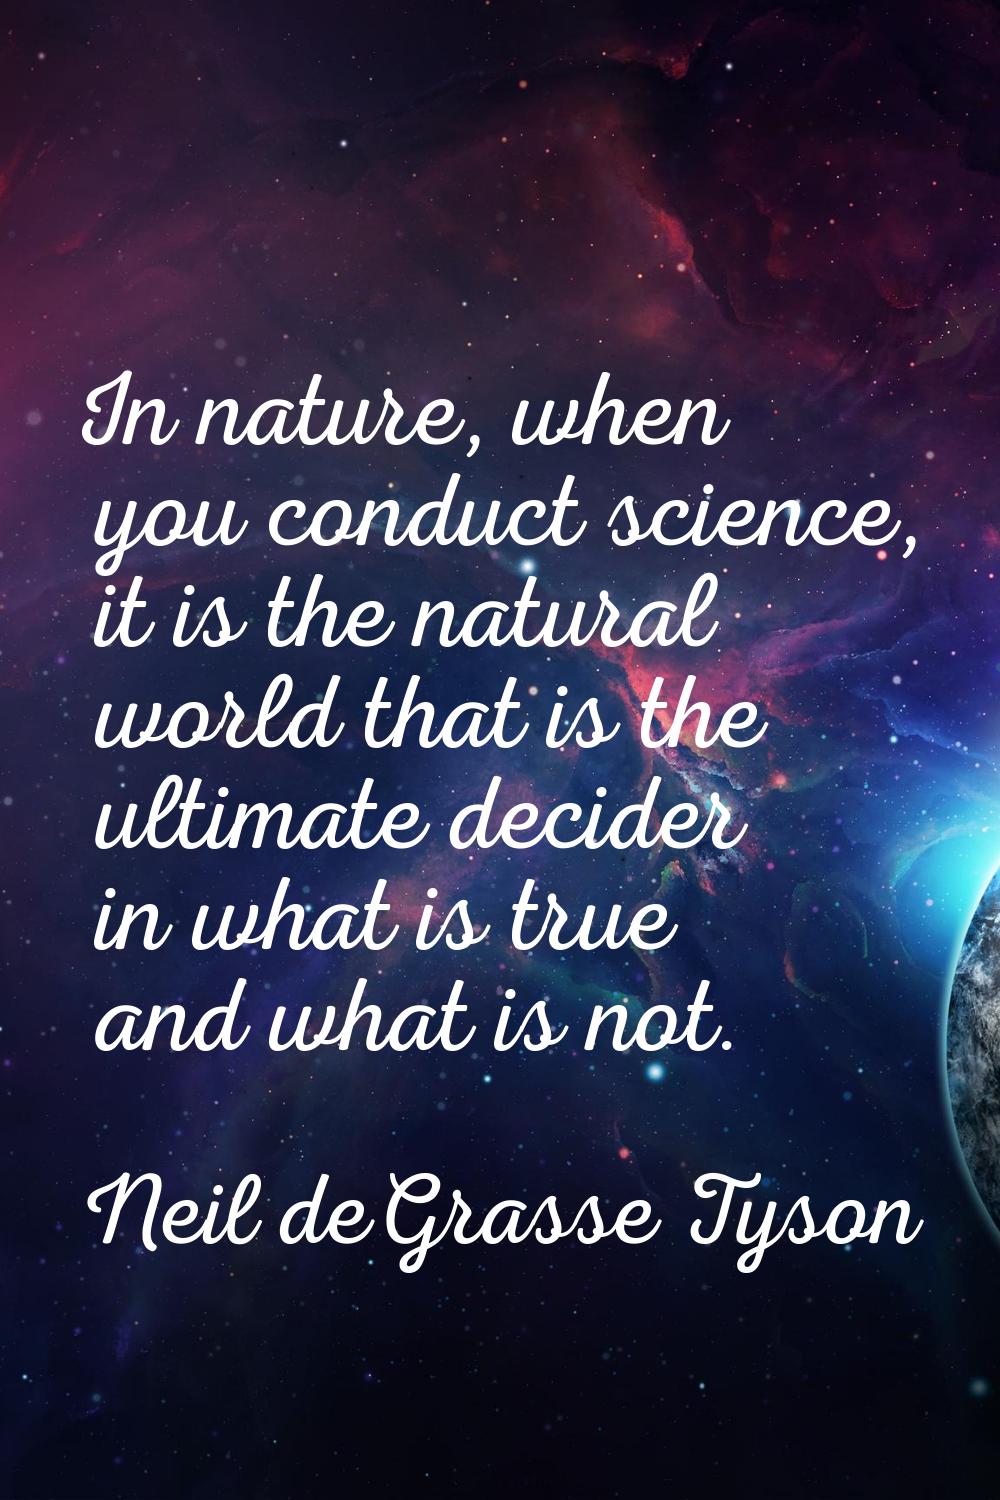 In nature, when you conduct science, it is the natural world that is the ultimate decider in what i